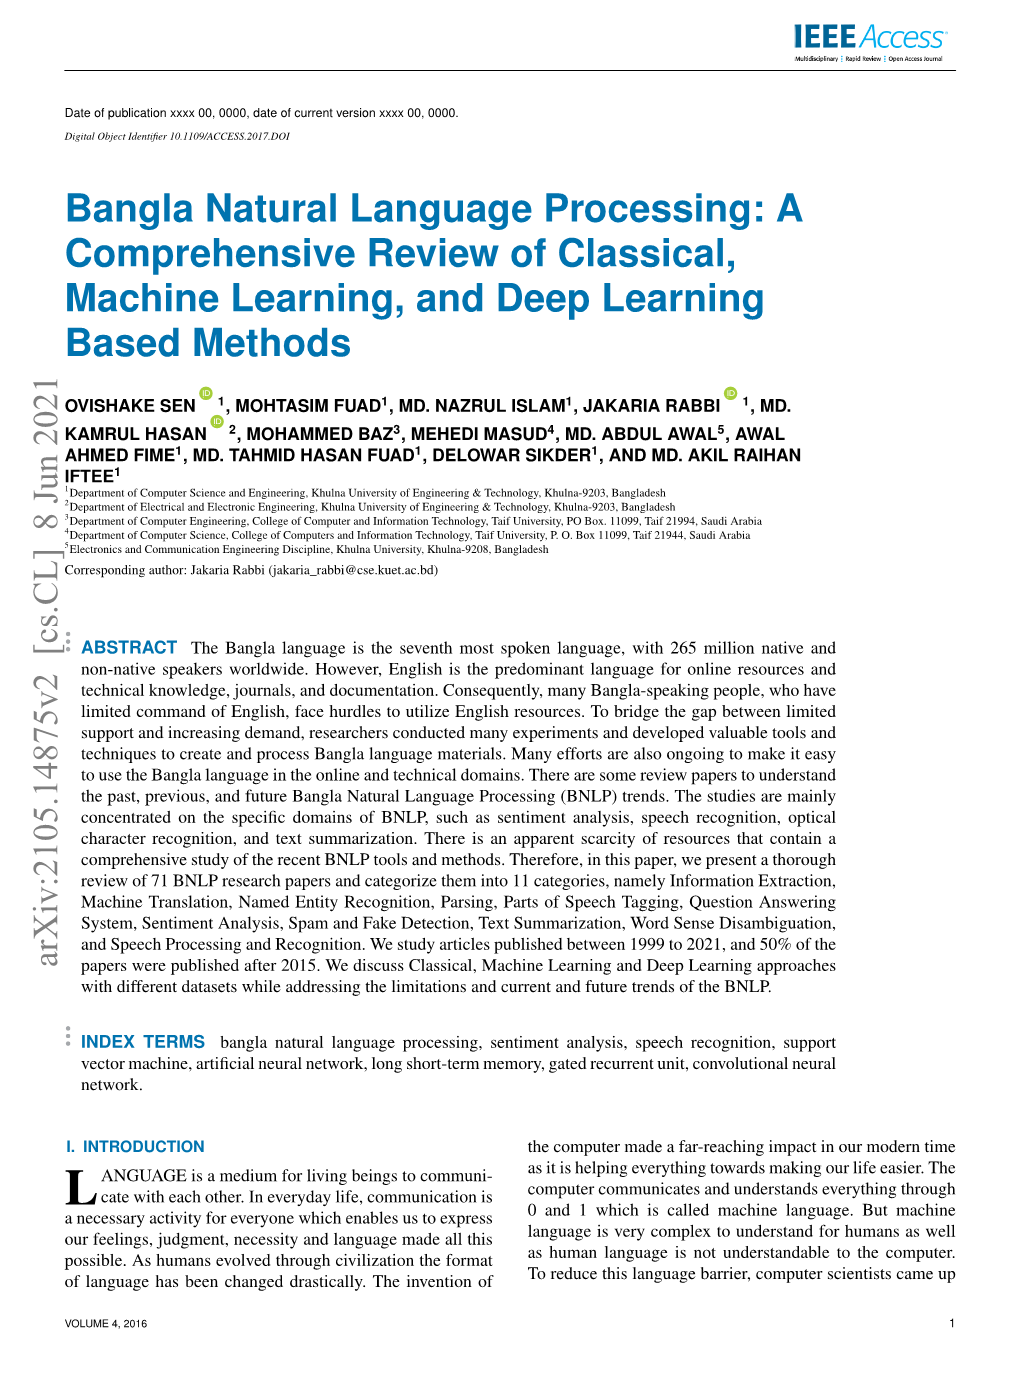 Bangla Natural Language Processing: a Comprehensive Review of Classical, Machine Learning, and Deep Learning Based Methods